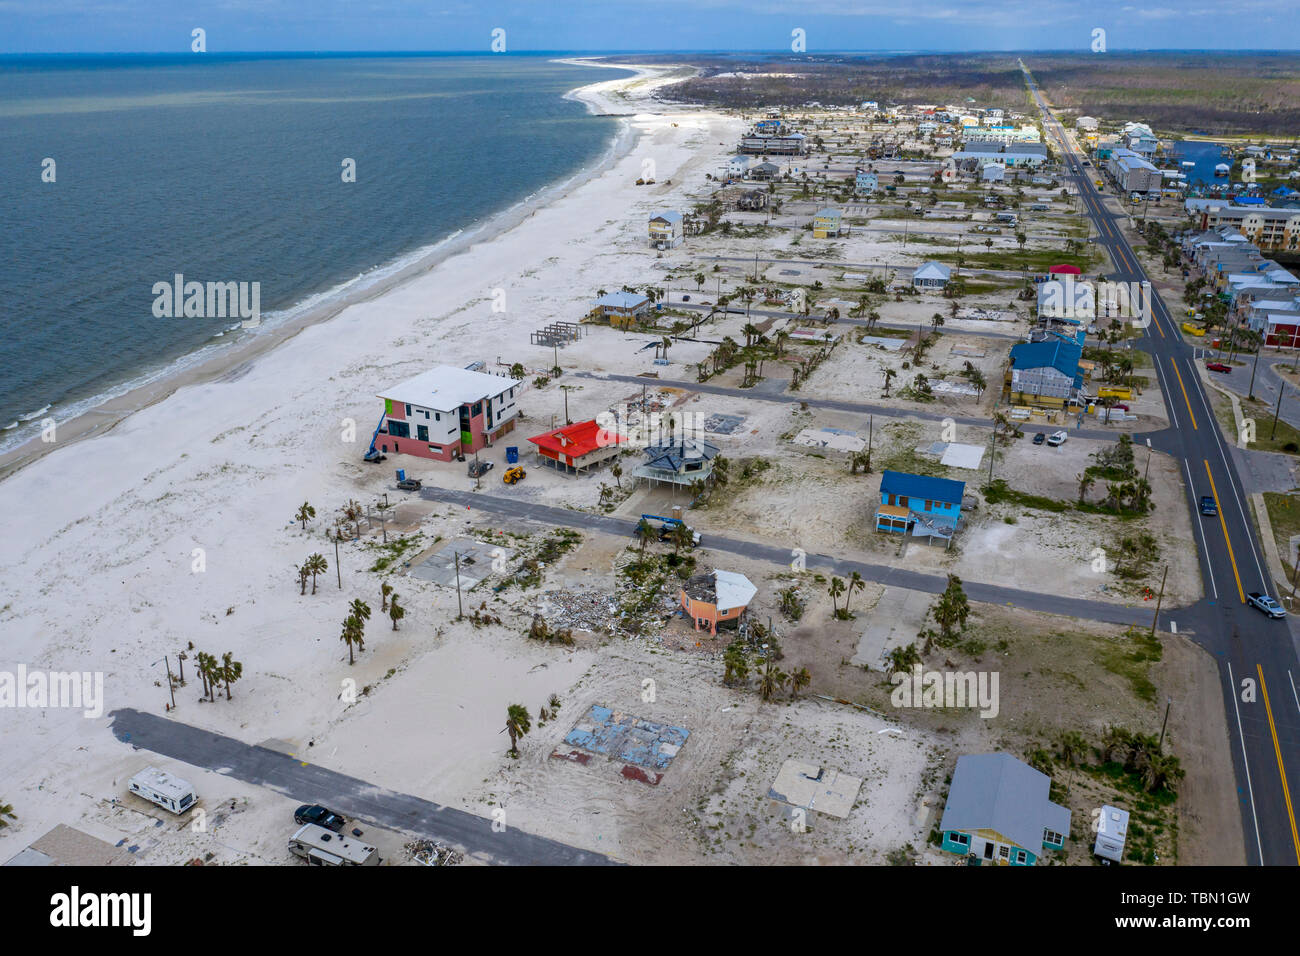 Mexico Beach, Florida - Destruction from Hurricane Michael is widespread seven months after the Category 5 storm hit the Florida Panhandle. Stock Photo